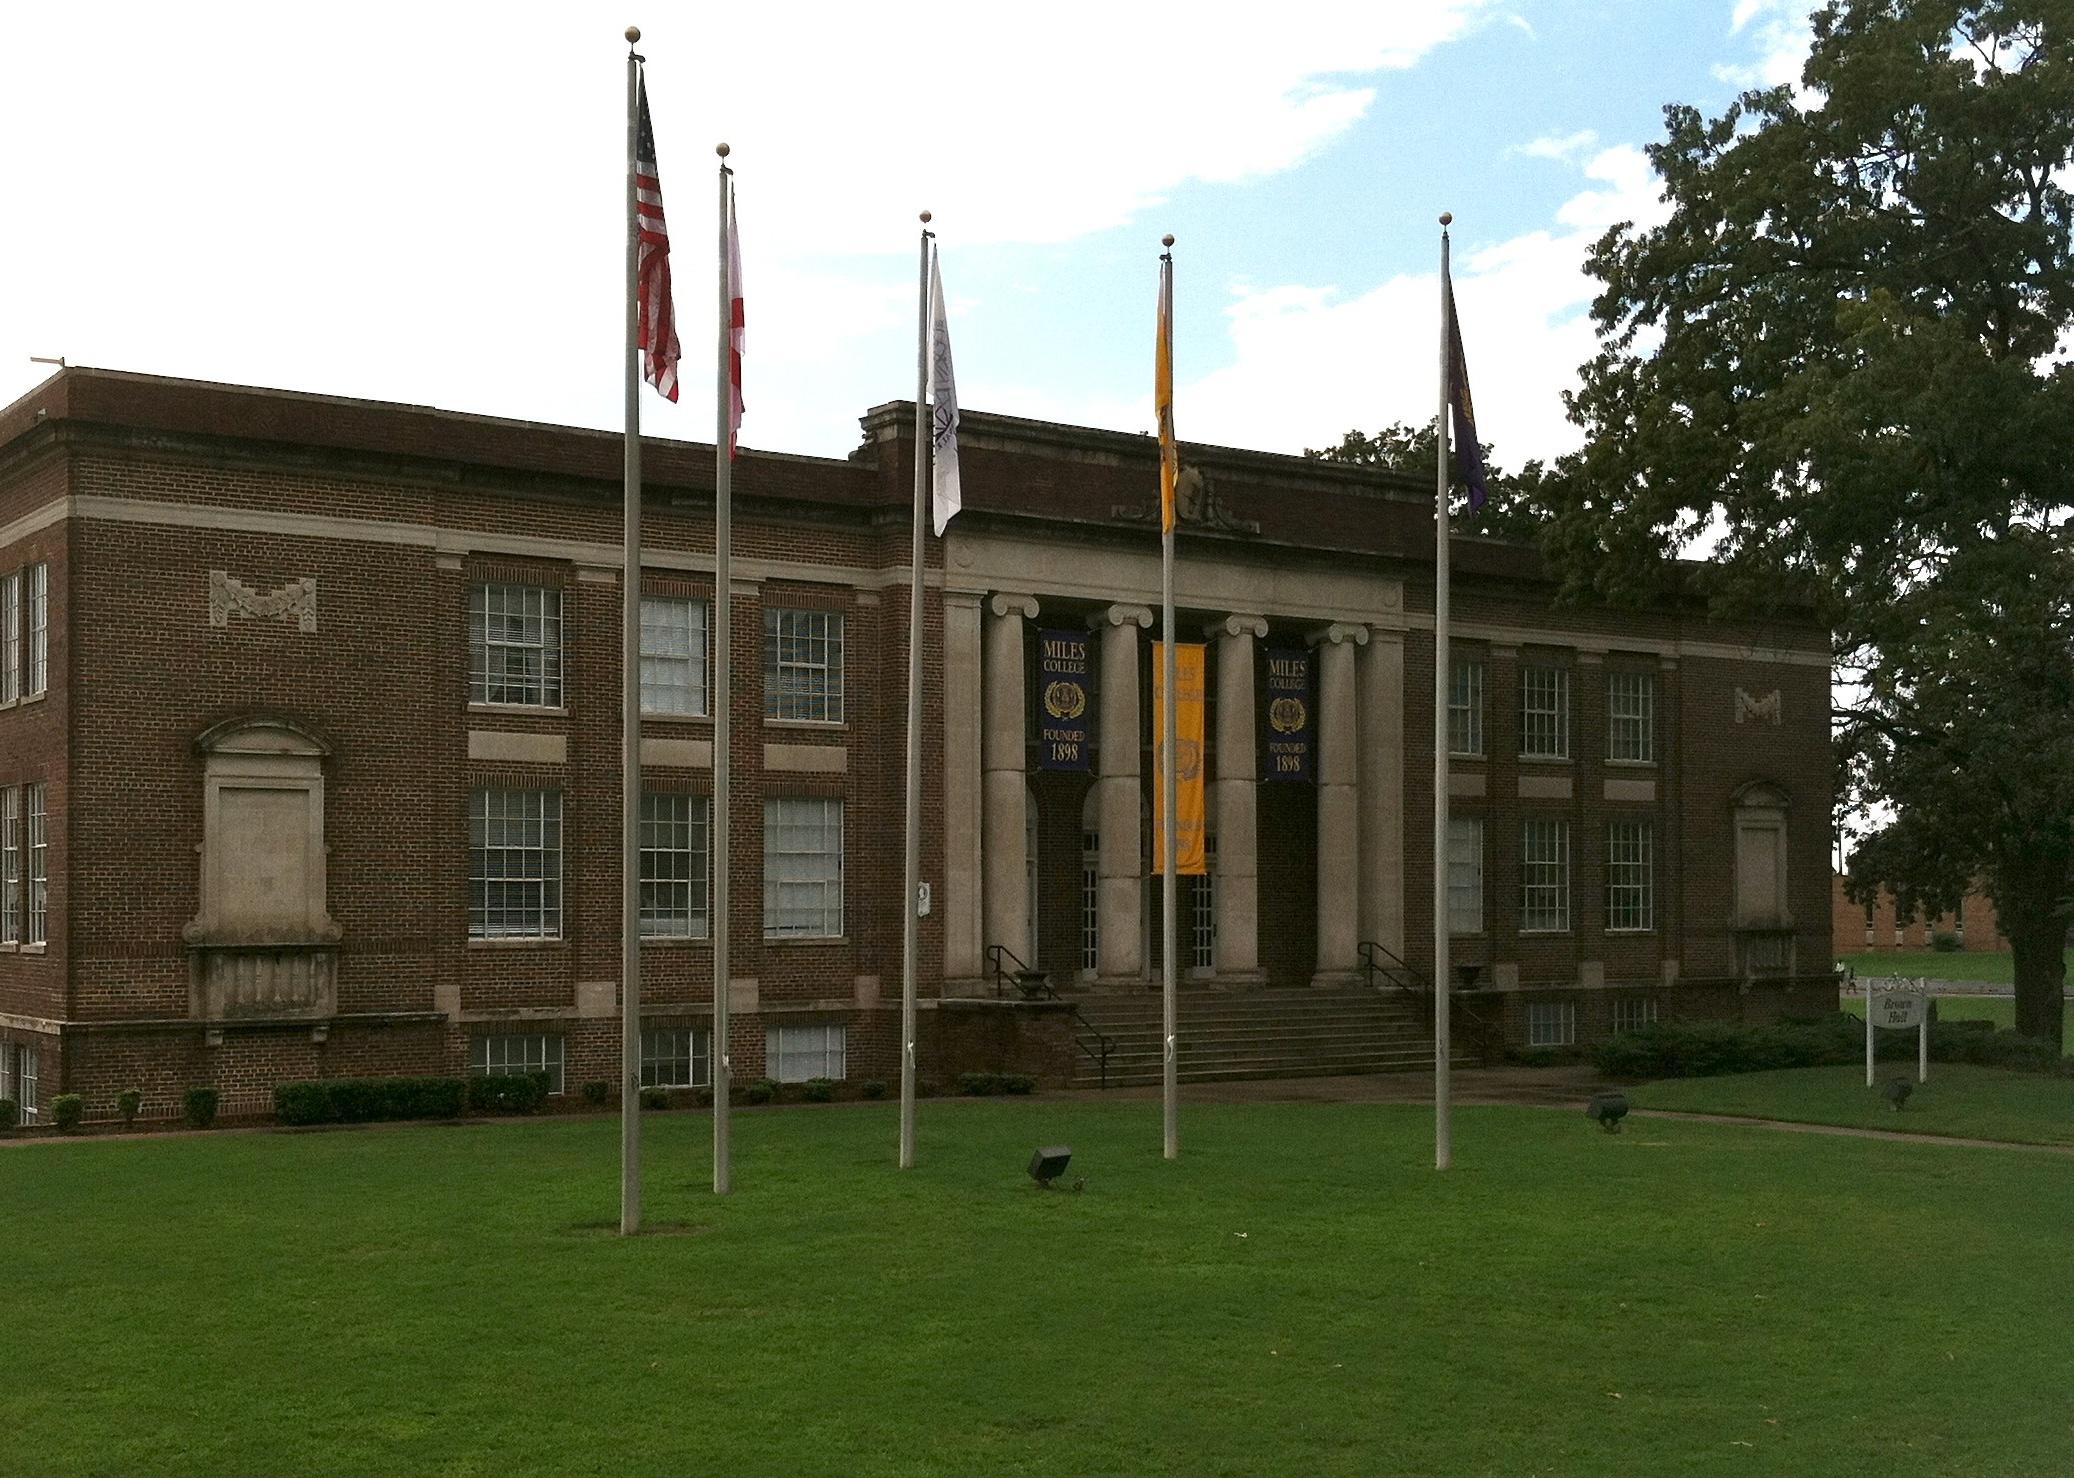 A historic red brick building with flags in front.